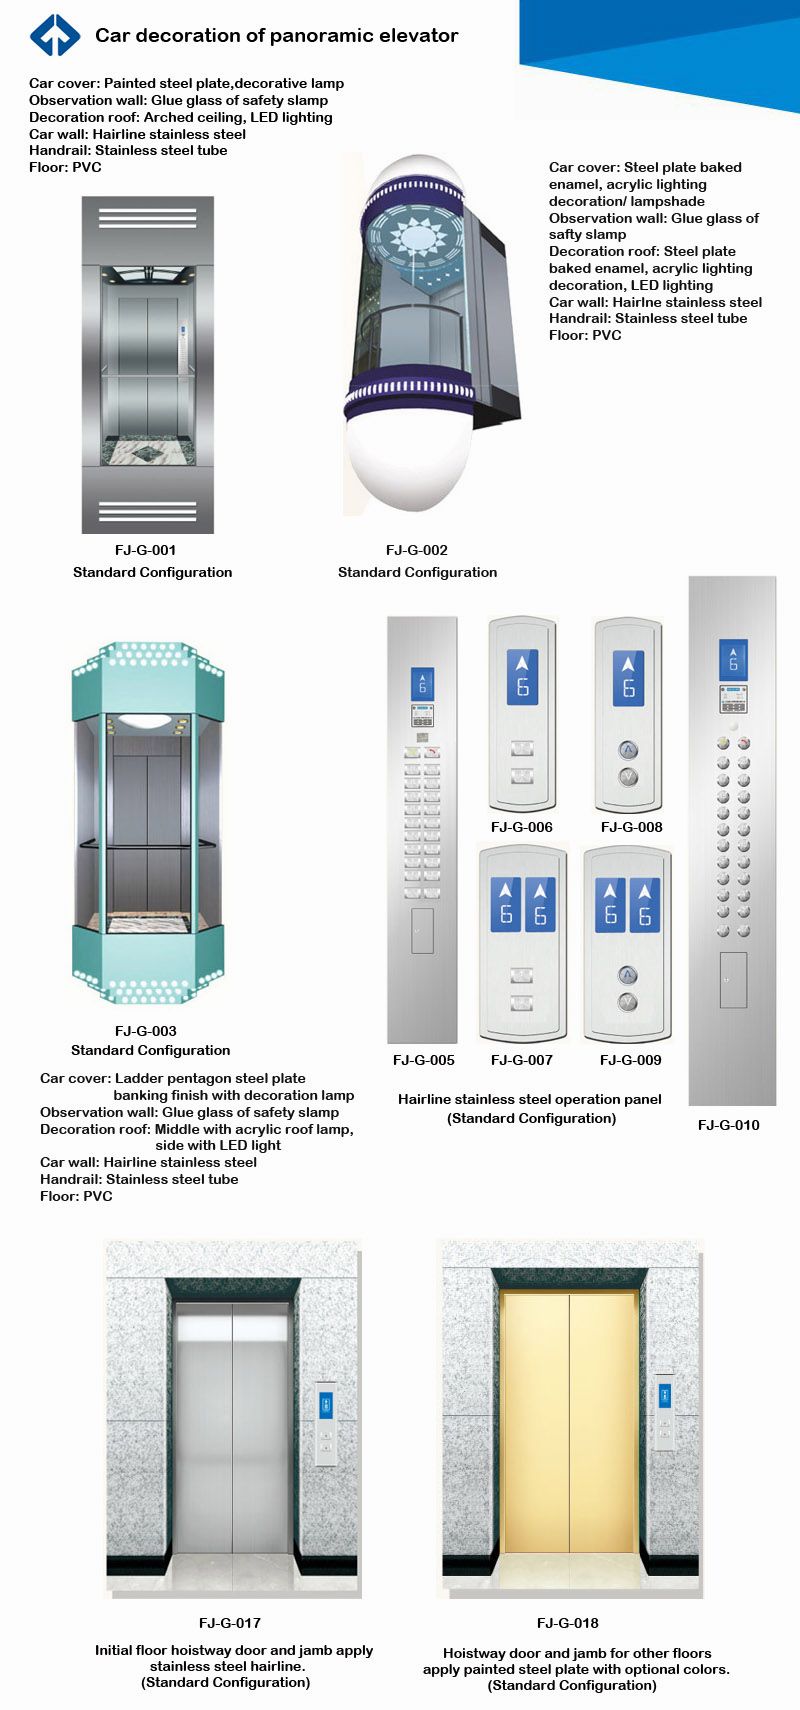 China Elevator Manufacture Panoramic Elevator of Japan Technology (round or square)